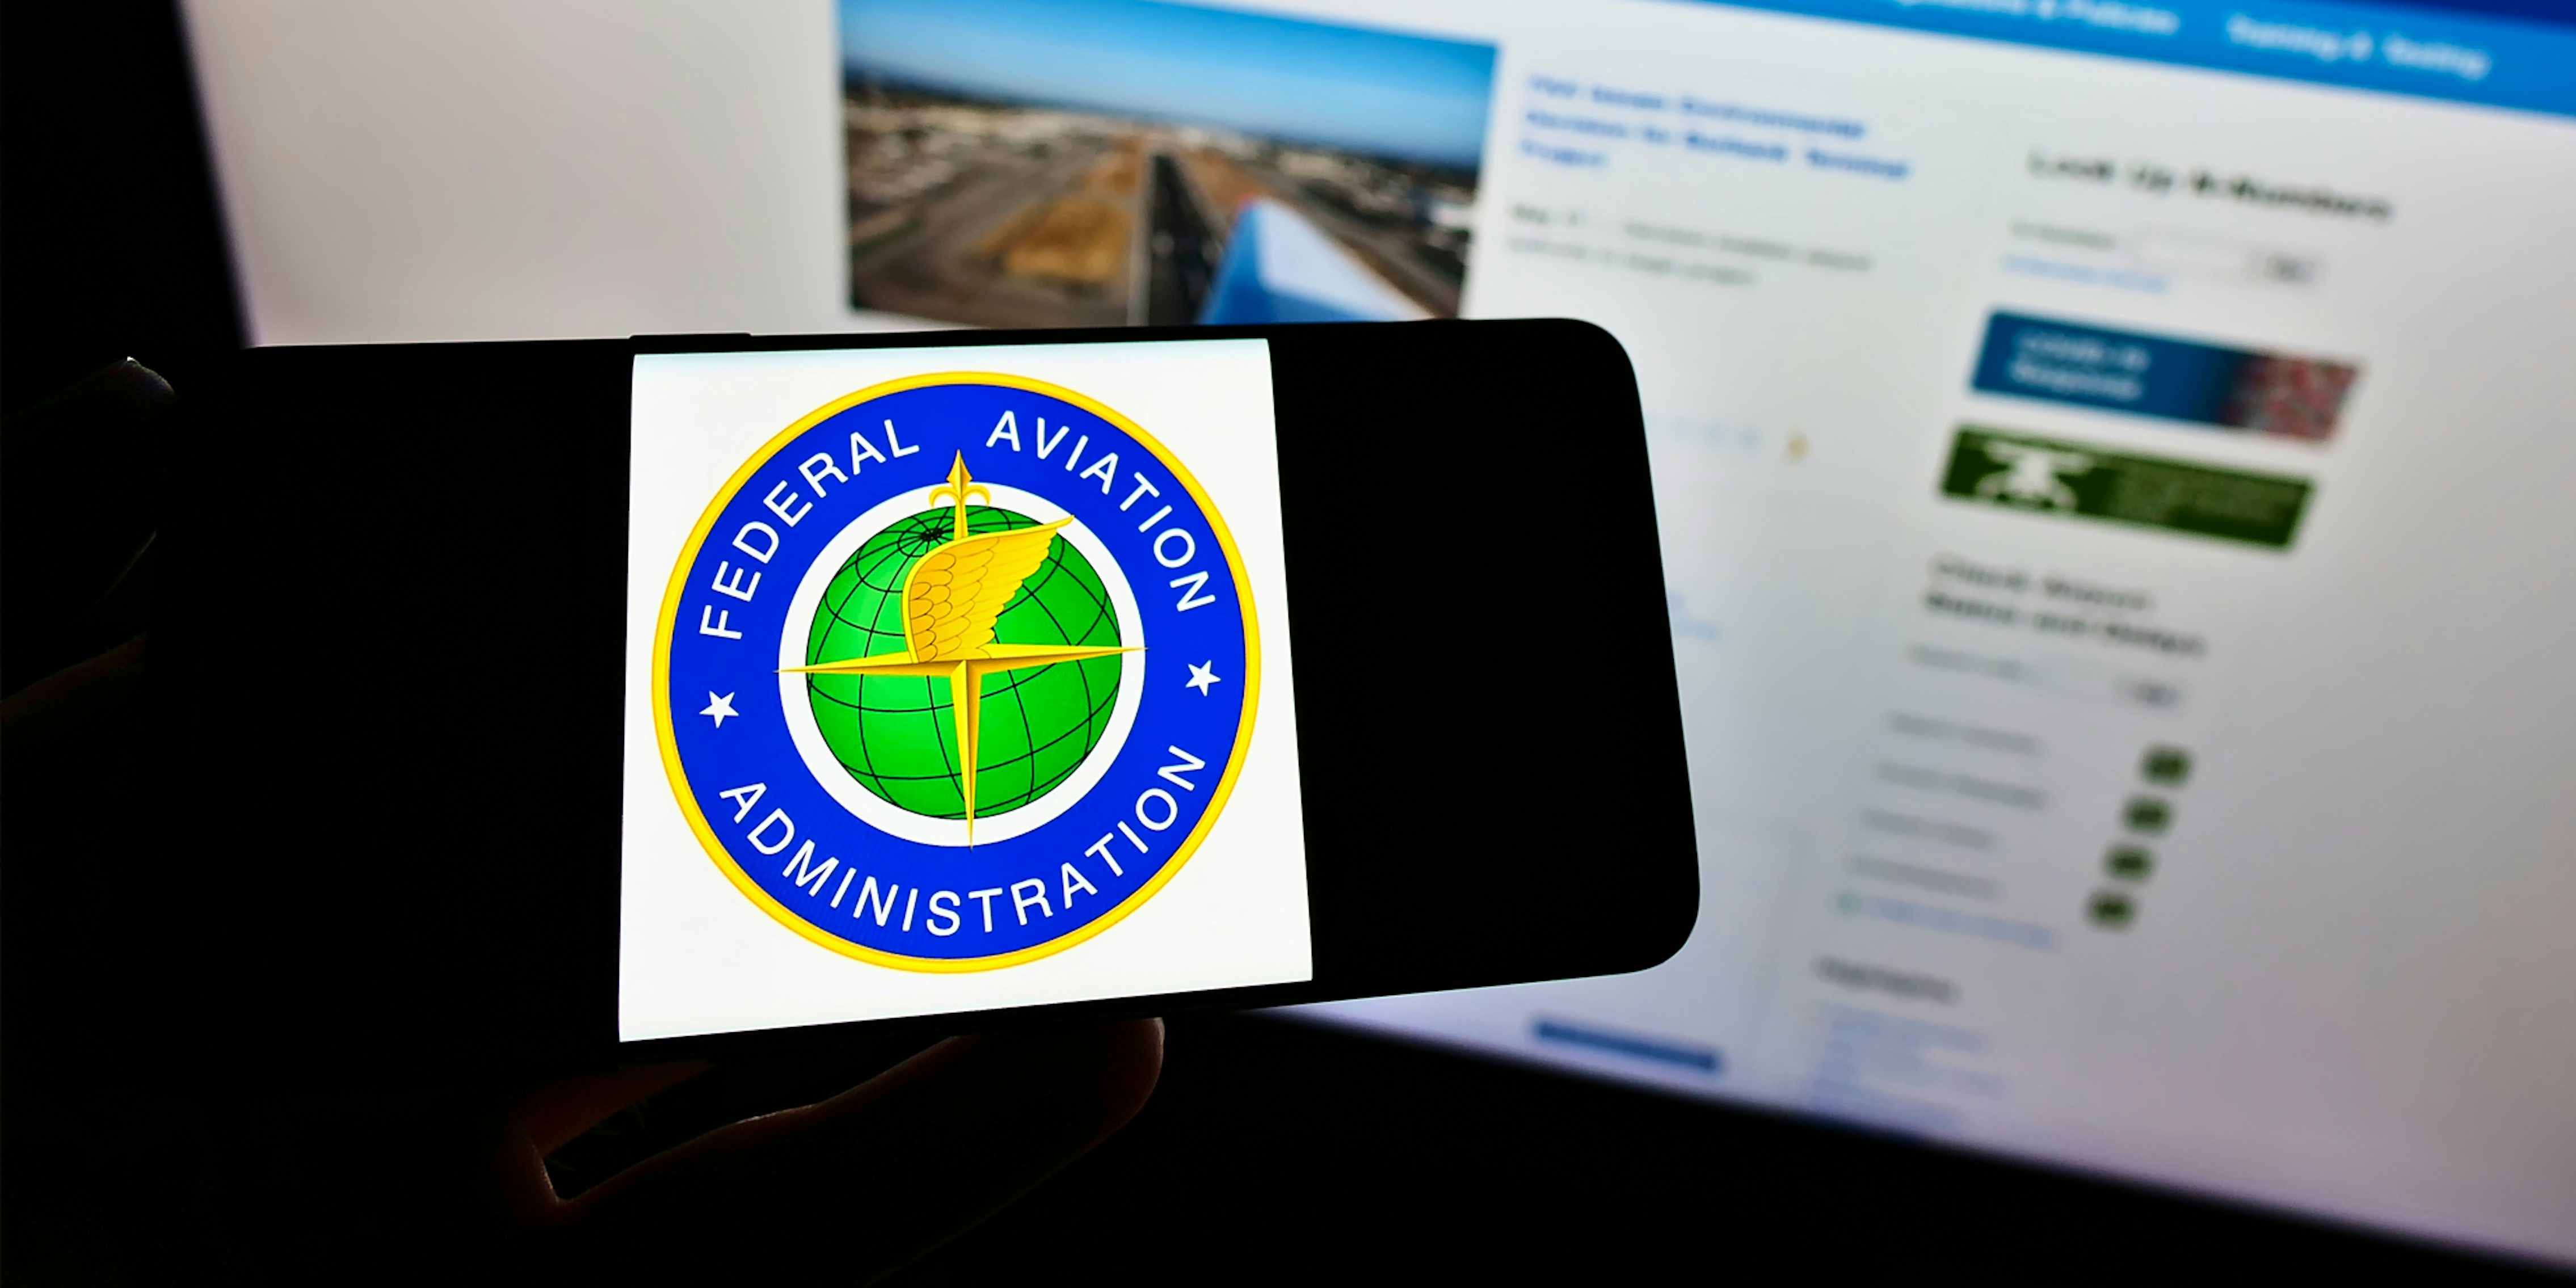 Federal Aviation Administration on phone in hand in front of monitor with FAA website on screen